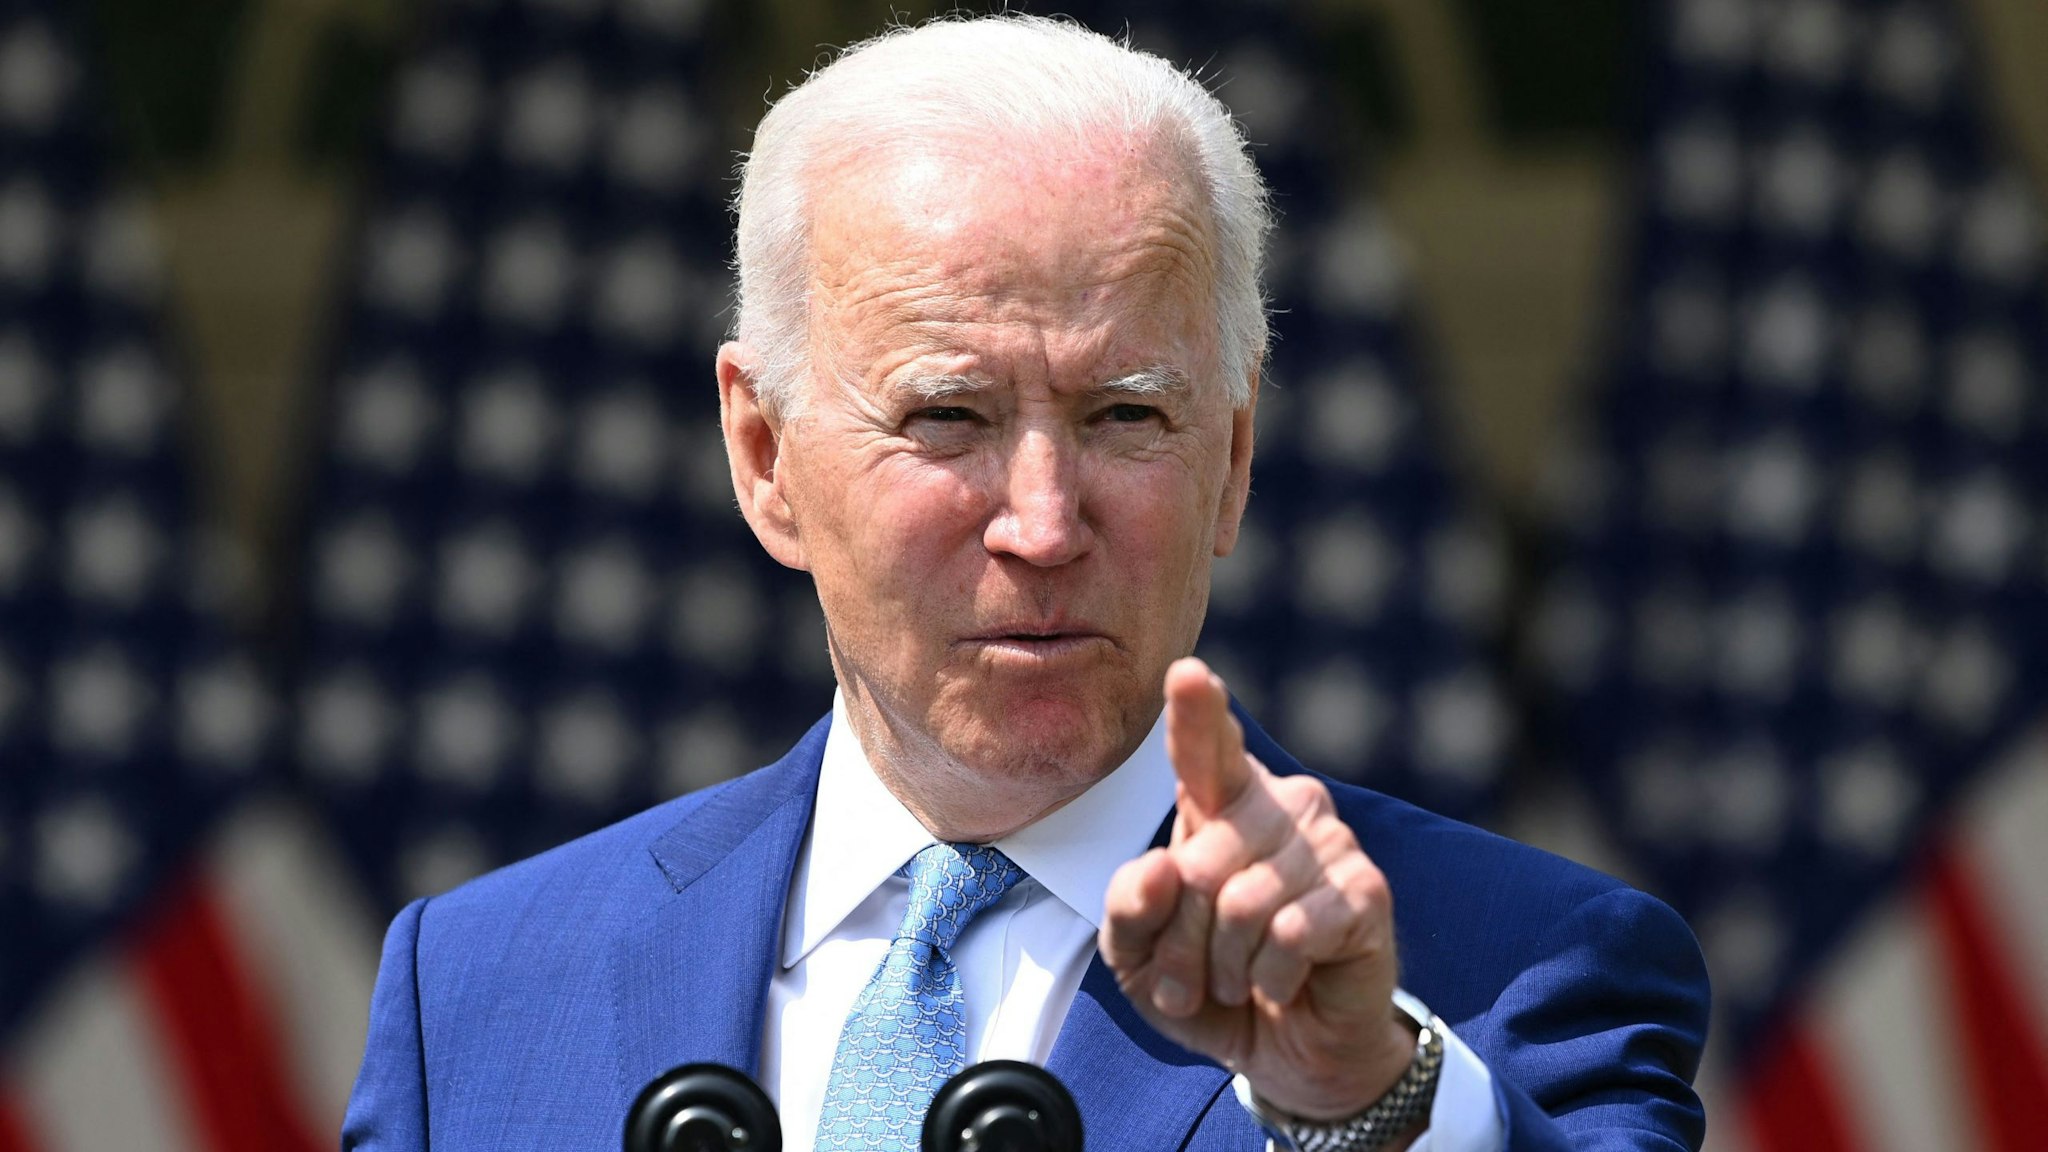 US President Joe Biden speaks about gun violence prevention in the Rose Garden of the White House in Washington, DC, on April 8, 2021. - Biden on Thursday called US gun violence an "epidemic" at a White House ceremony to unveil new attempts to get the problem under control.